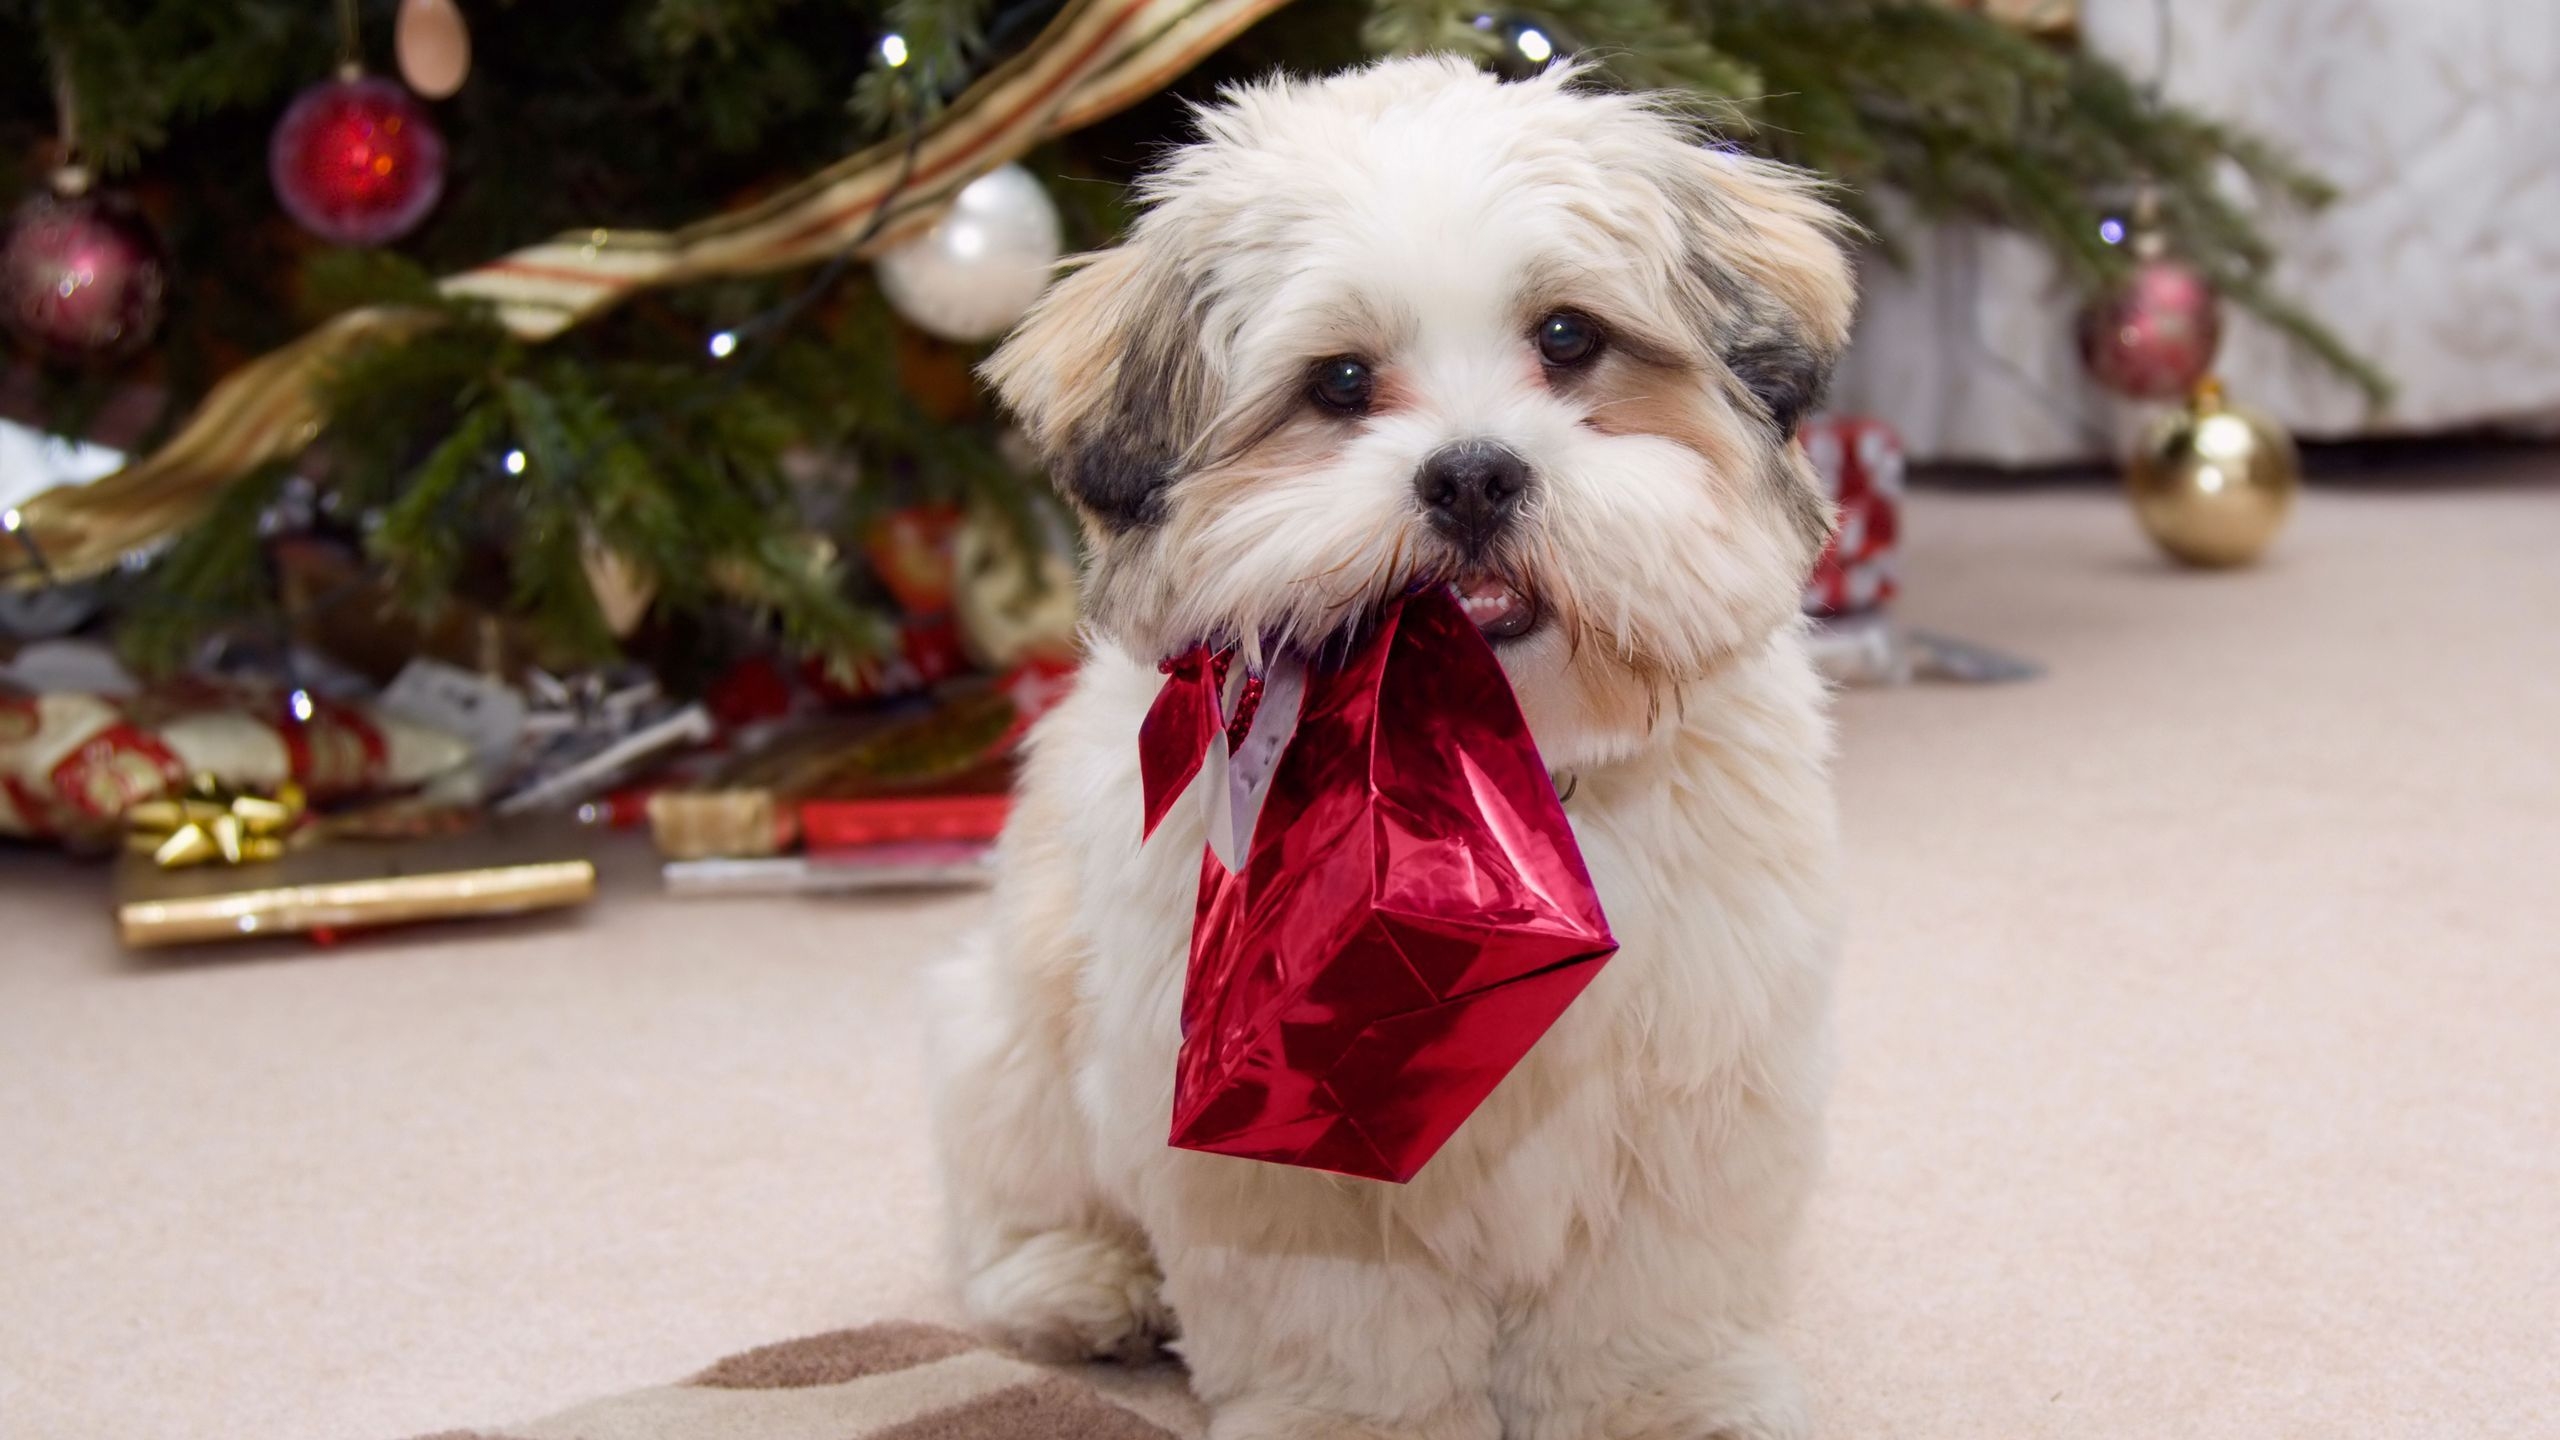 Puppy Ready for Christmas for 2560x1440 HDTV resolution